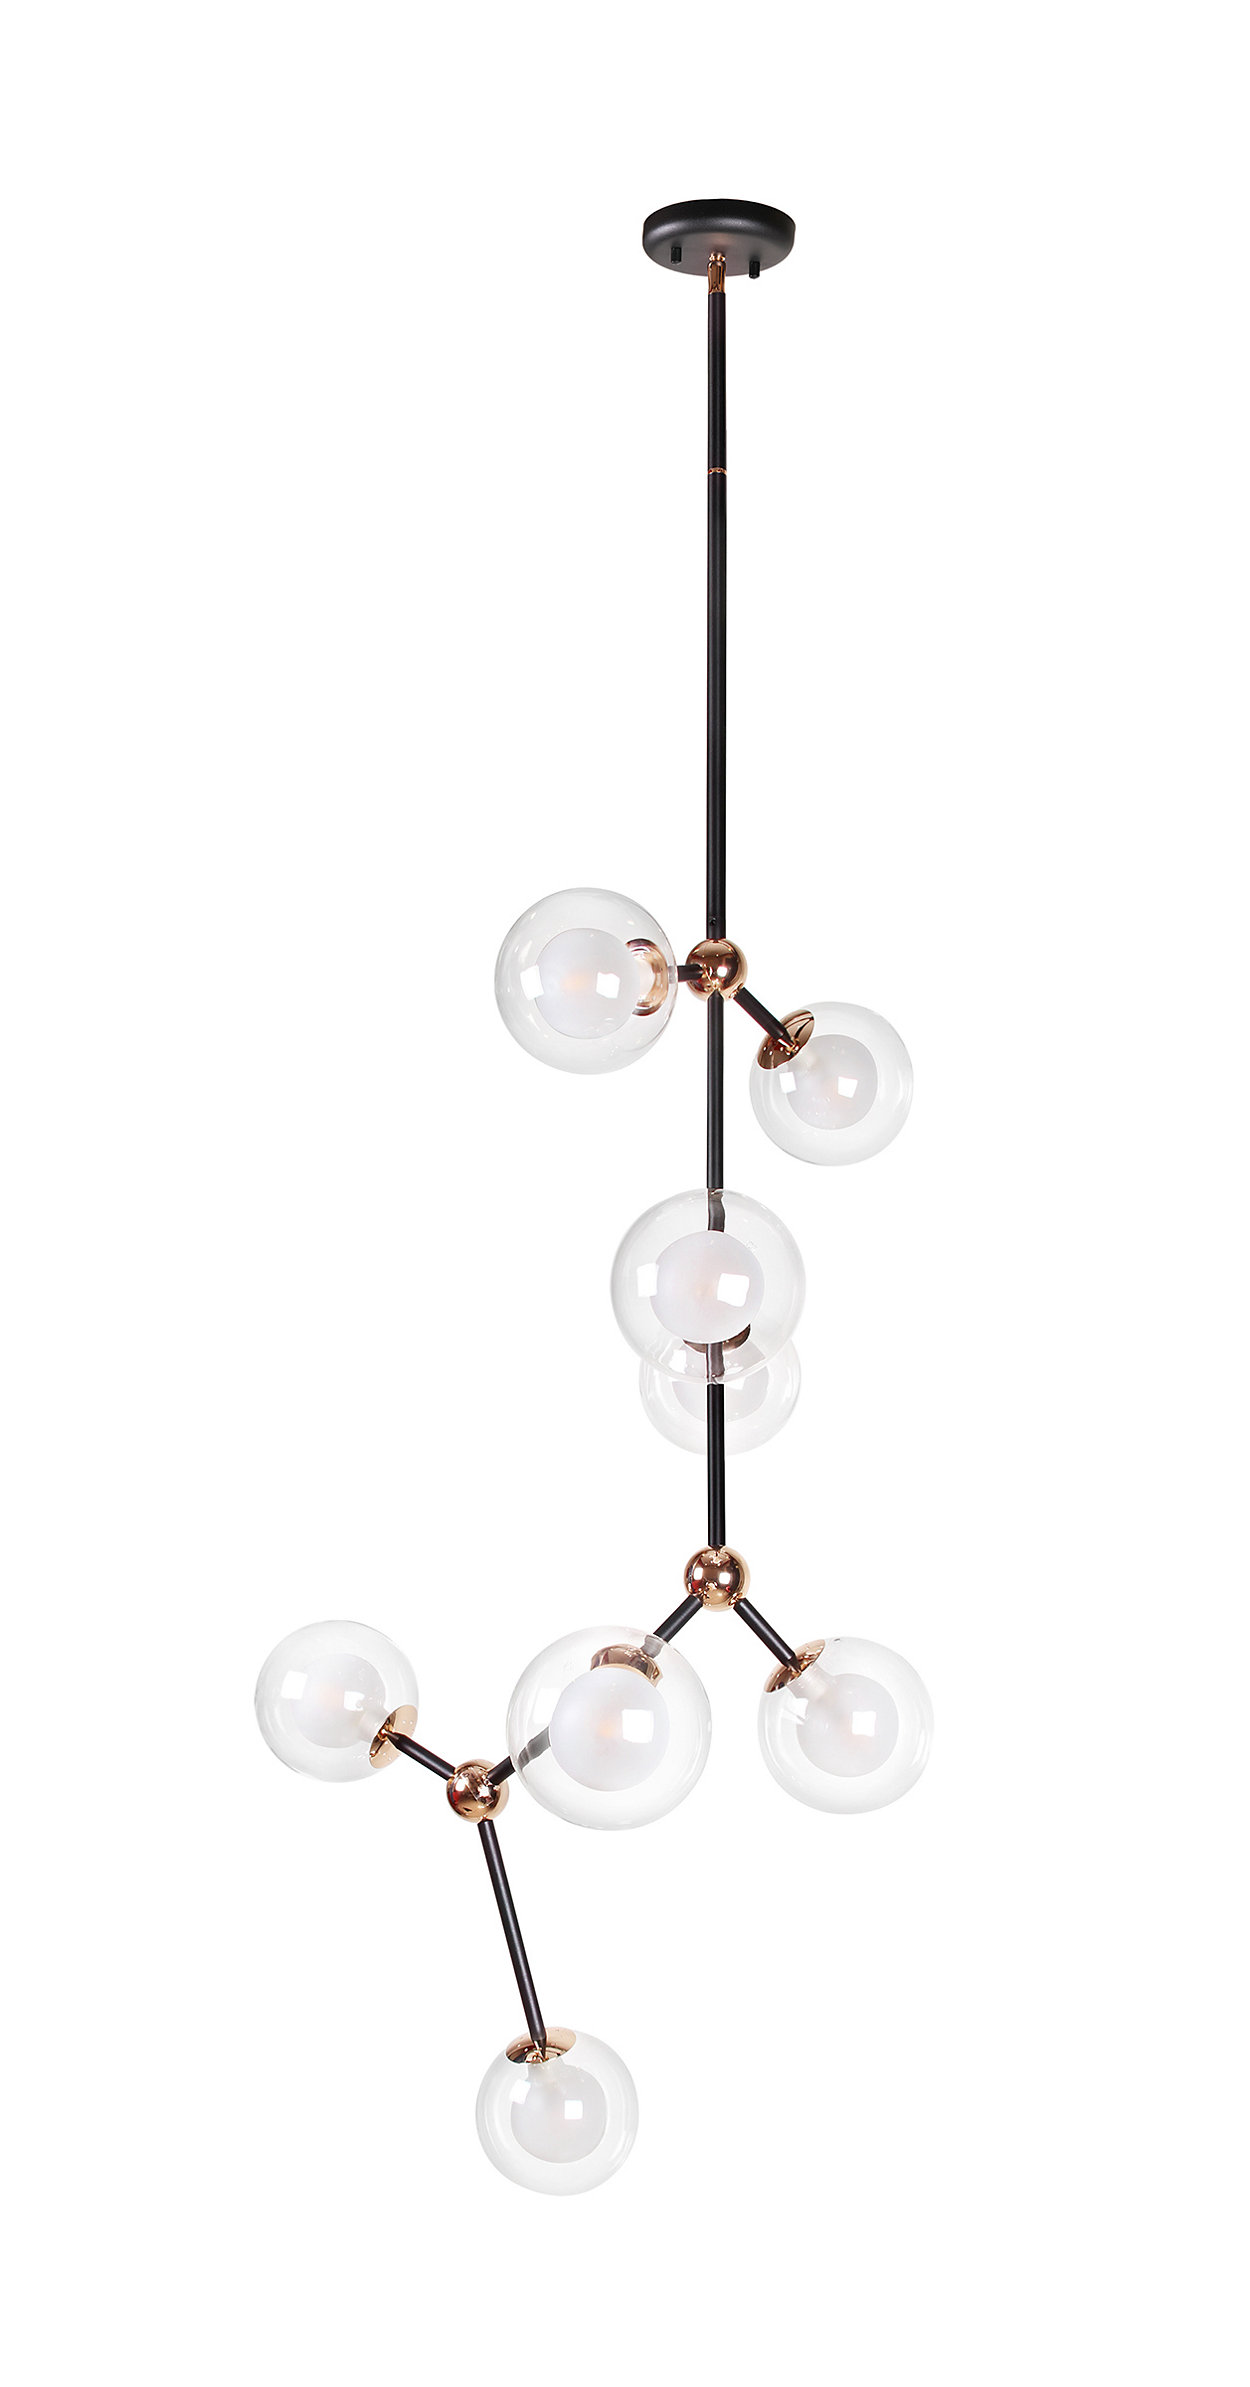 Contemporary chandelier to illuminate your home